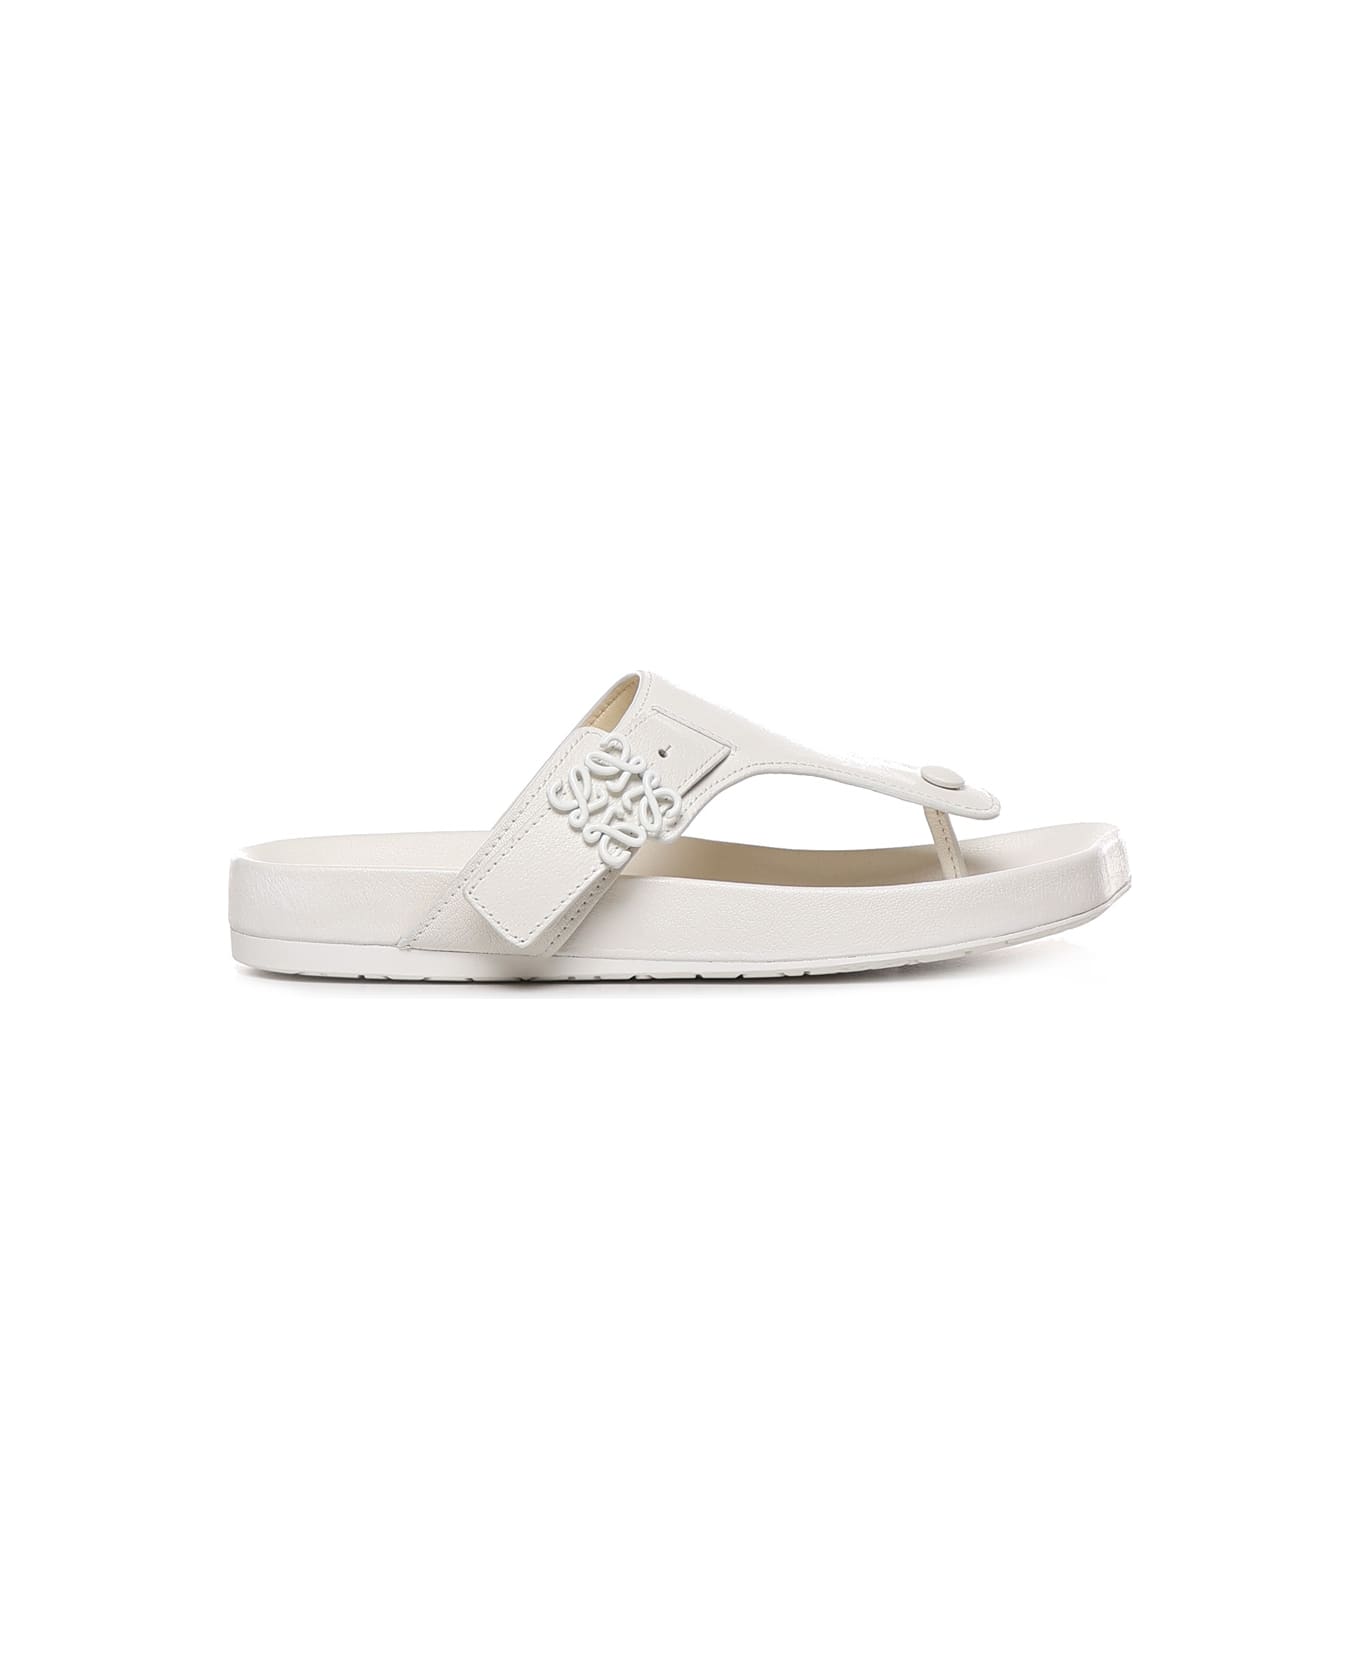 Loewe Ease Sandals In Rubber - White